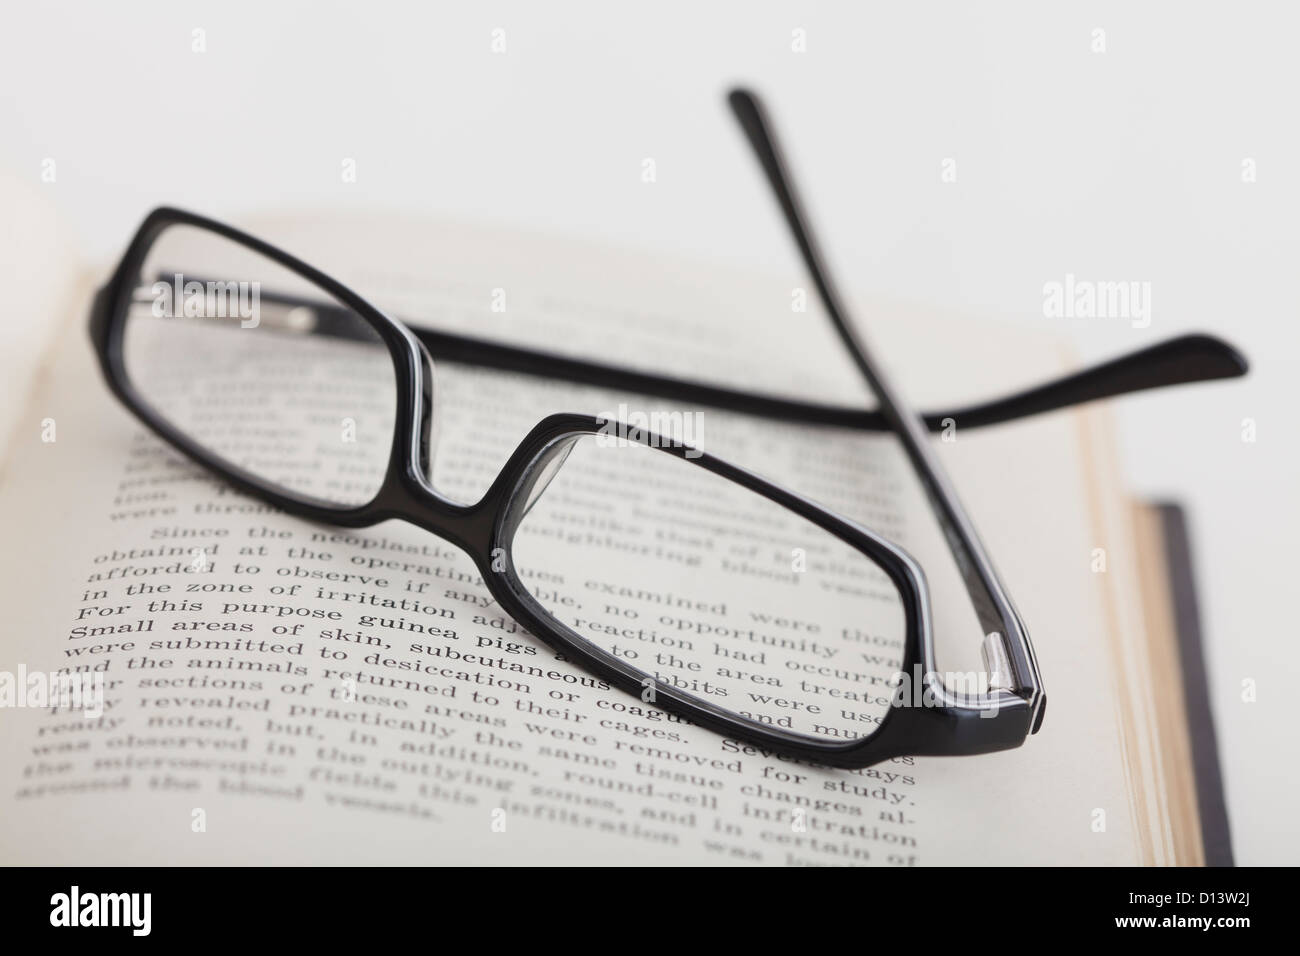 Close up of reading glasses on book, studio shot Stock Photo